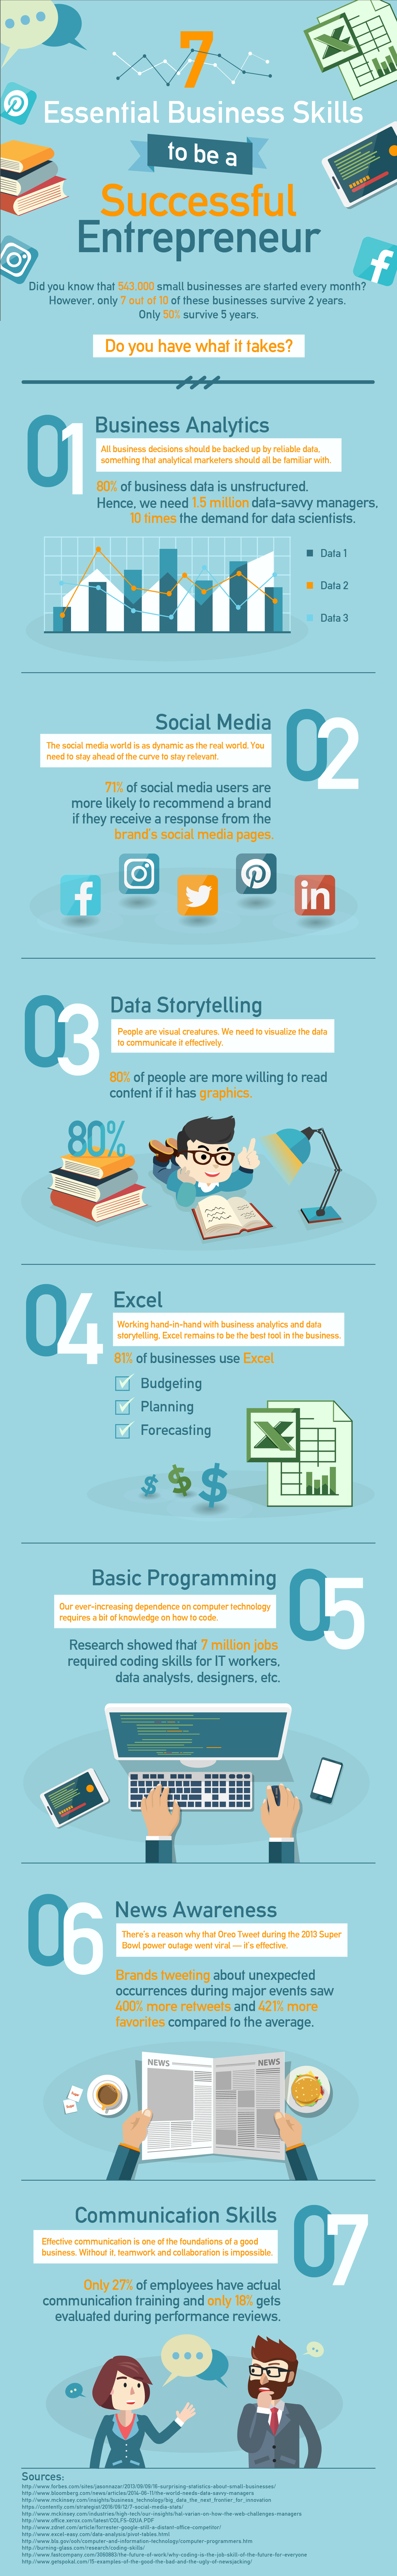 7 Essential business skills to be a successful entrepreneur infographic